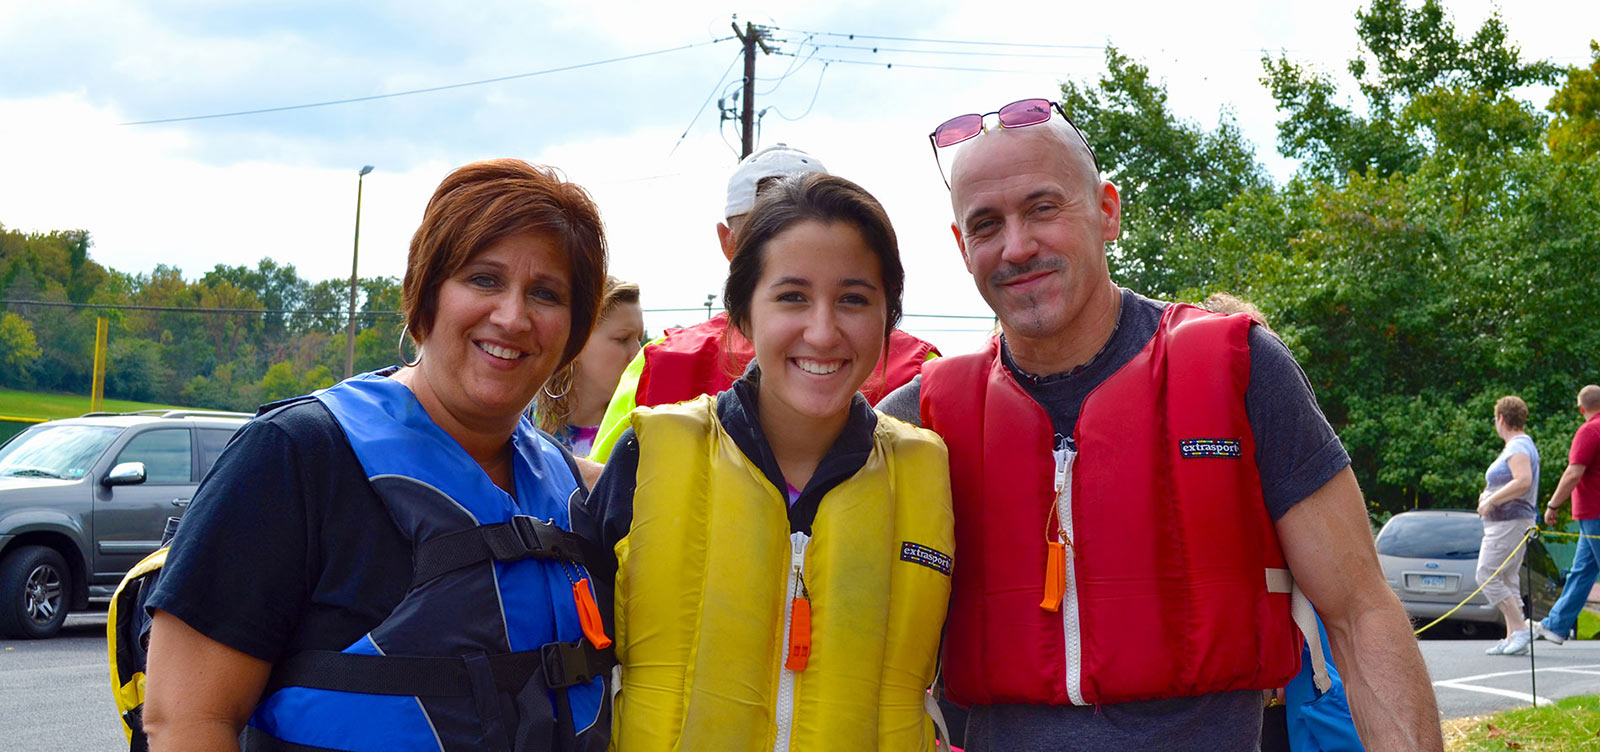 Parent and Family Relations parents with their daughter wearing a lifevest prior to canoeing.jpg